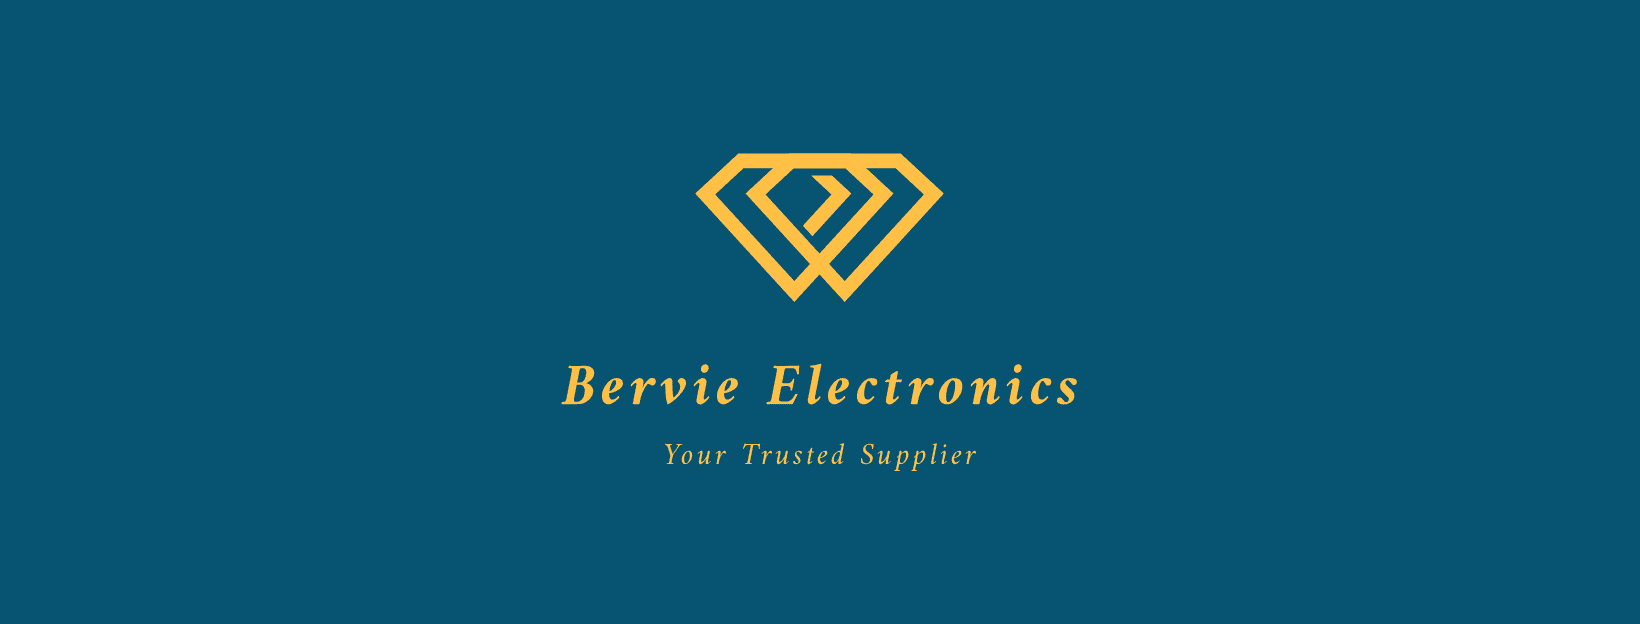 Quality Refurbished Computers at BervieElectronics